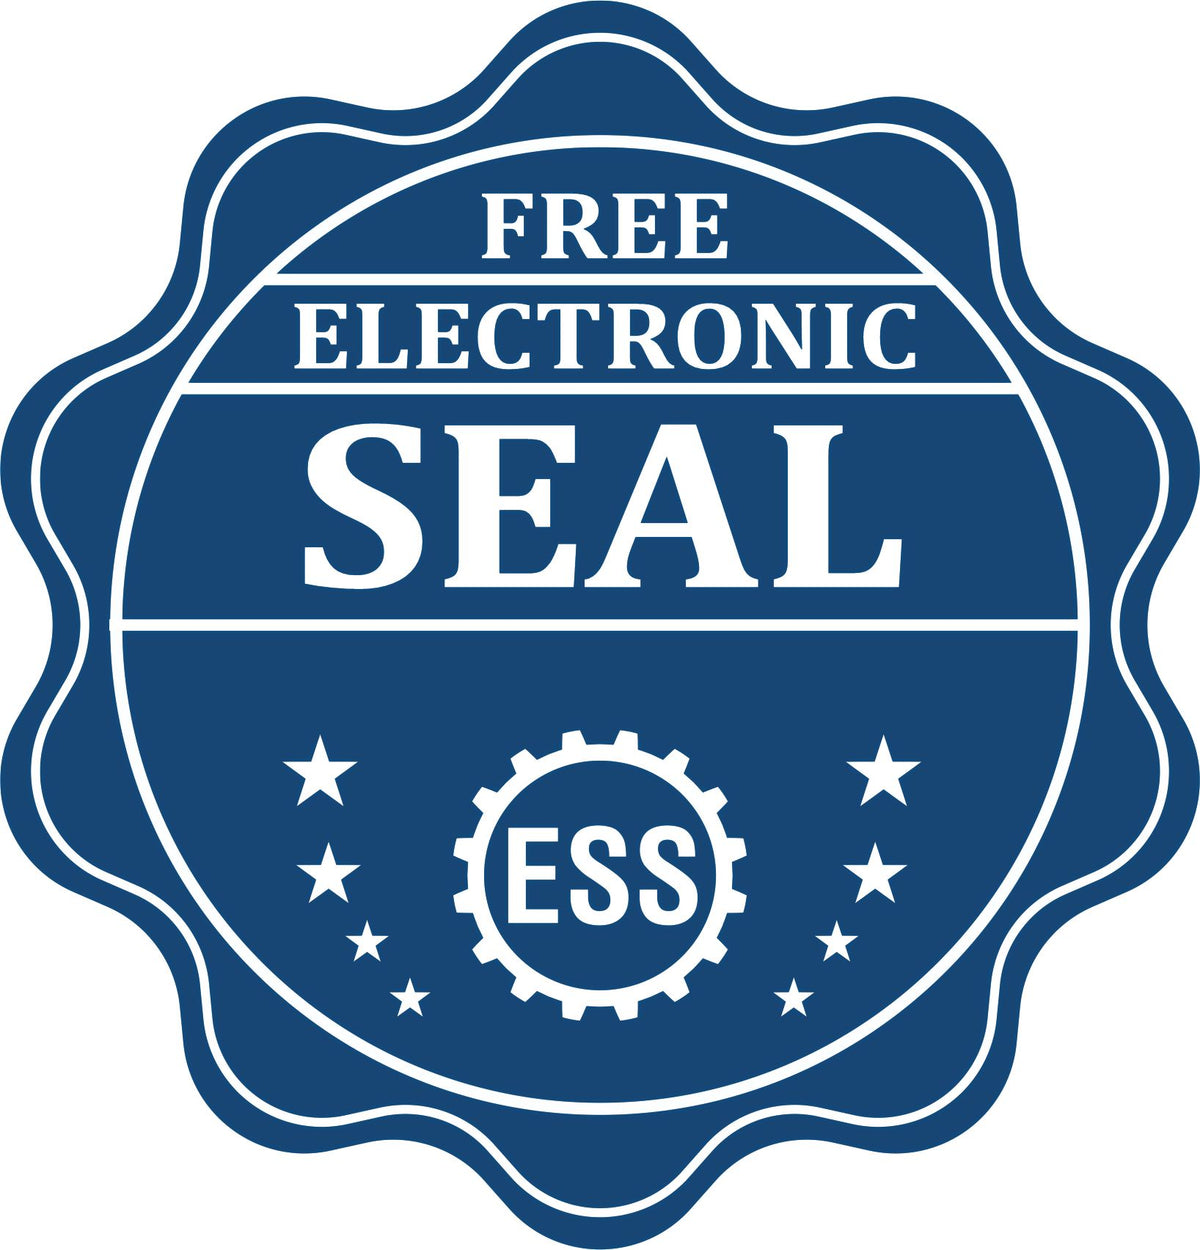 A badge showing a free electronic seal for the Heavy Duty Cast Iron Delaware Engineer Seal Embosser with stars and the ESS gear on the emblem.